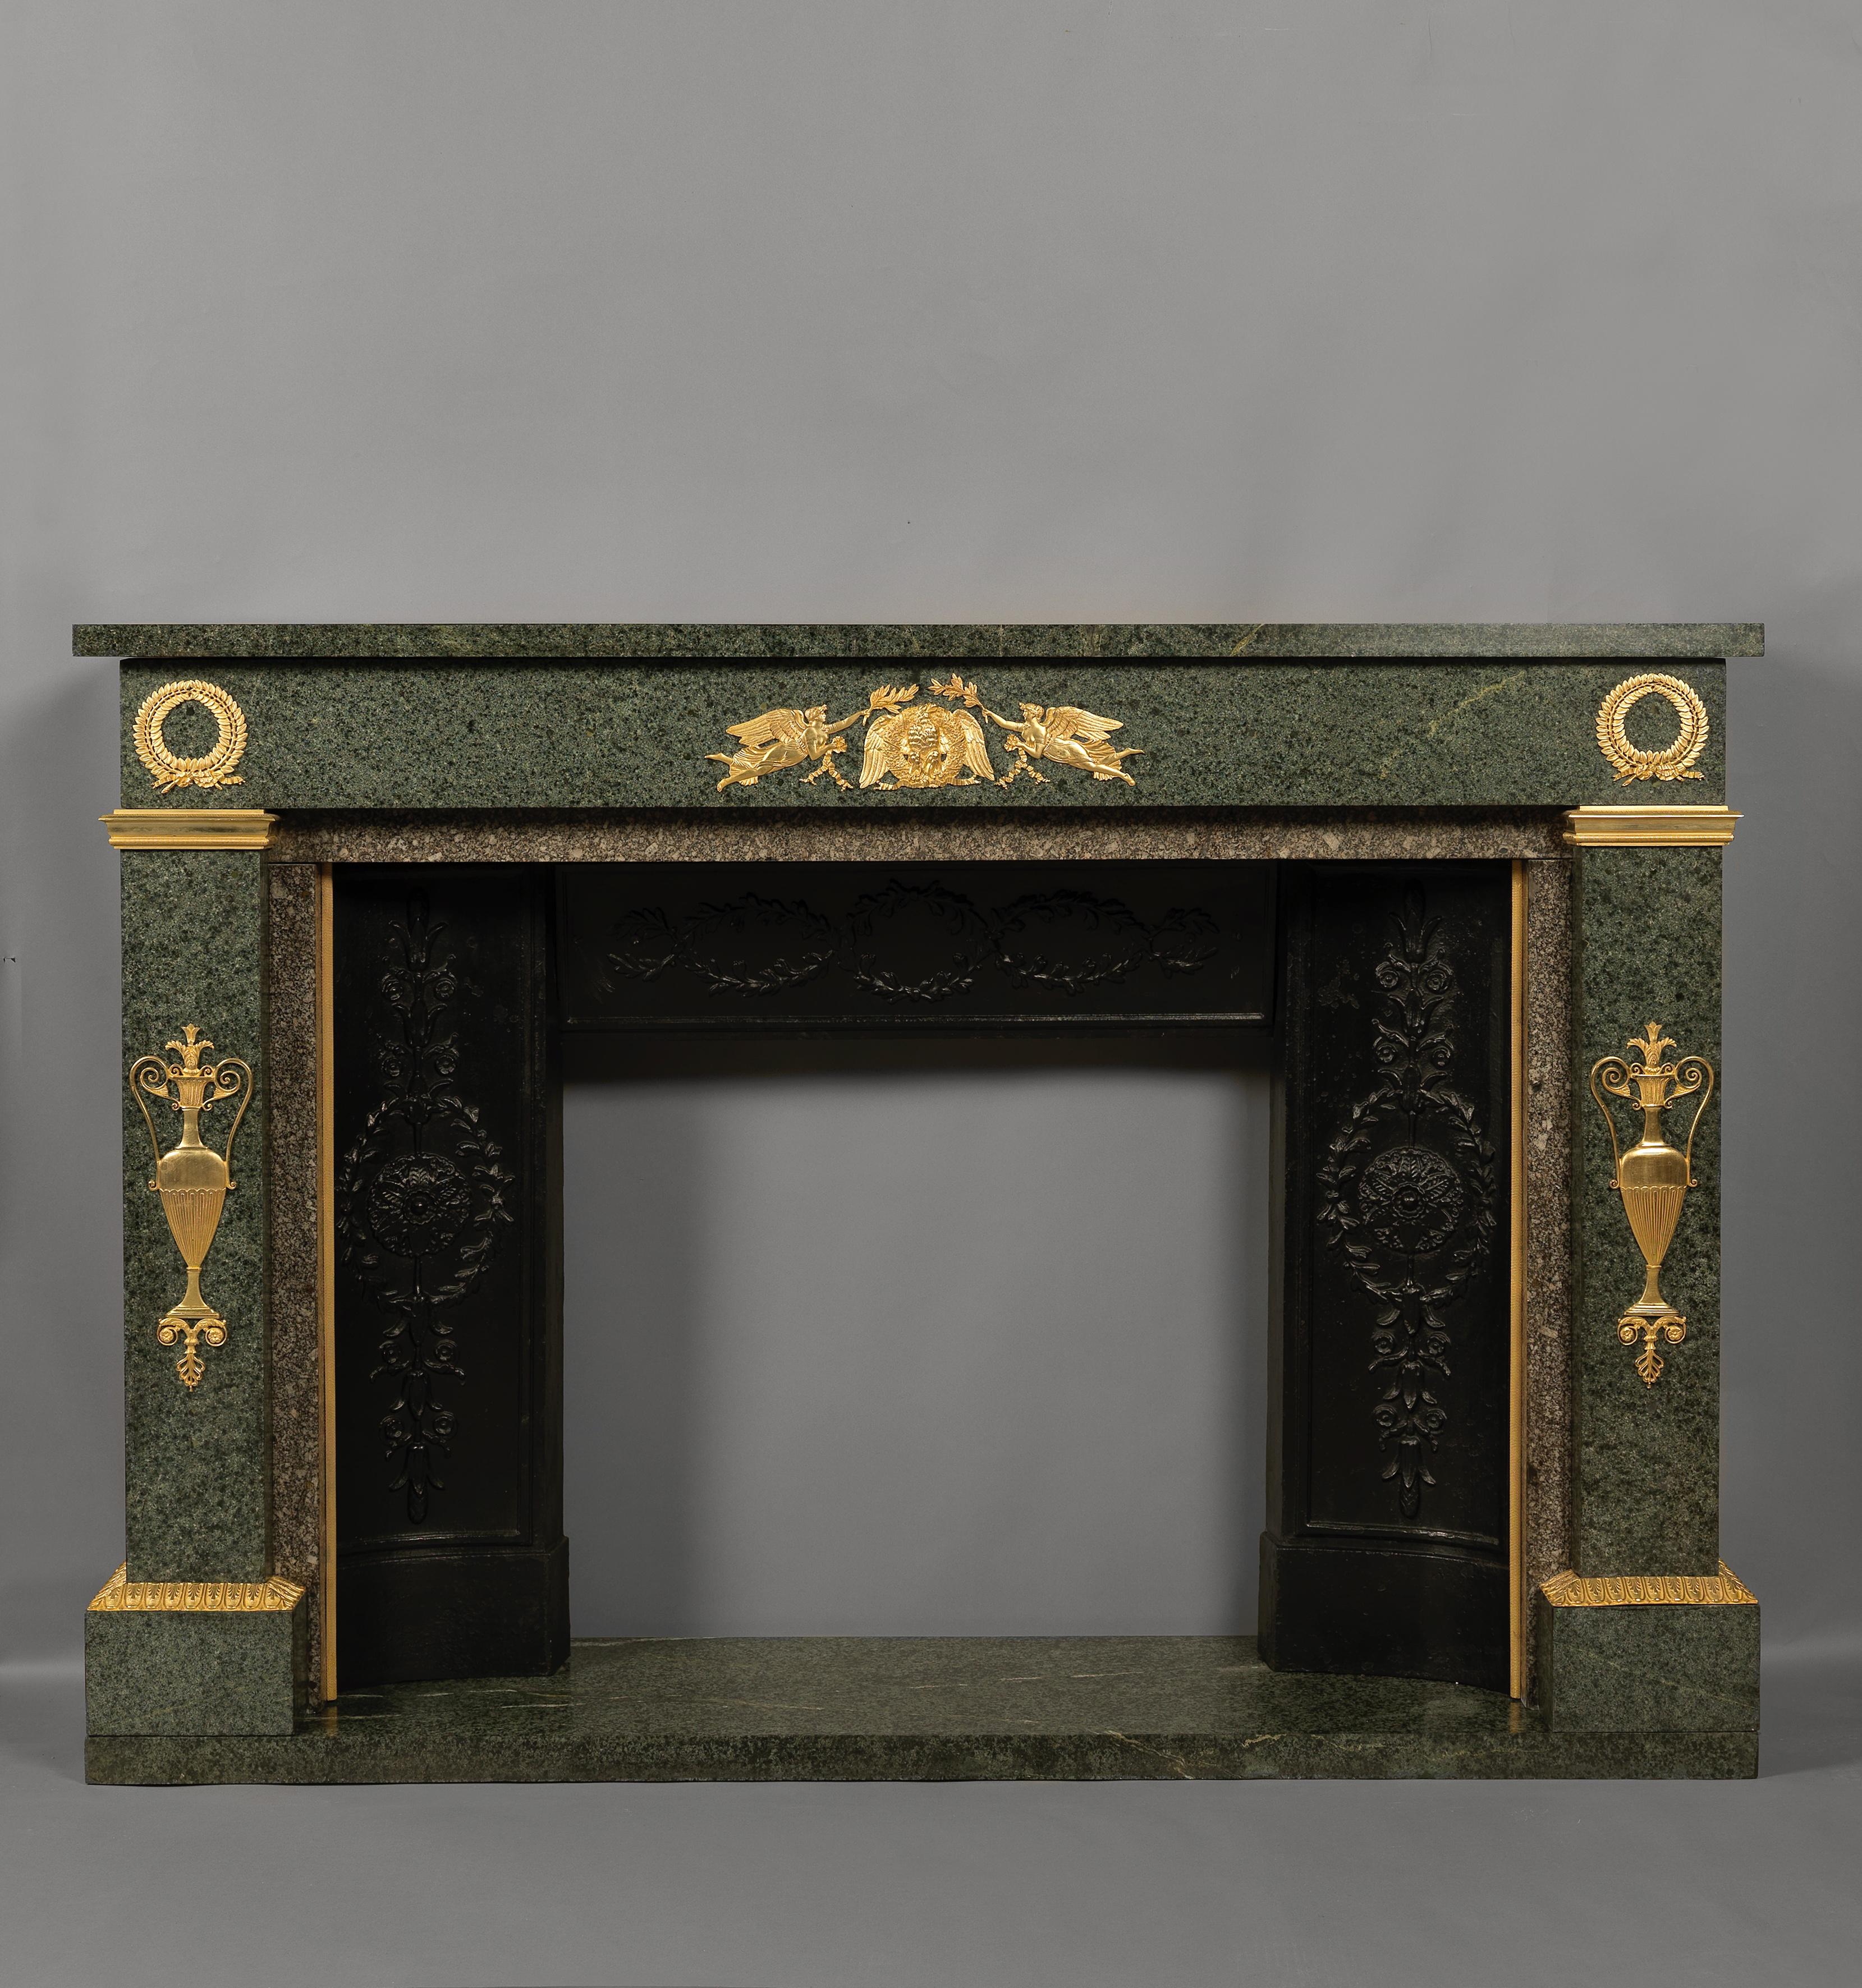 An Empire style gilt bronze-mounted green granite fireplace. 

French, circa 1850. 

The fireplace has a rectangular mantel shelf above a frieze centred by applied gilt-bronze mounts of an Eagle and wreath supported by winged female figures